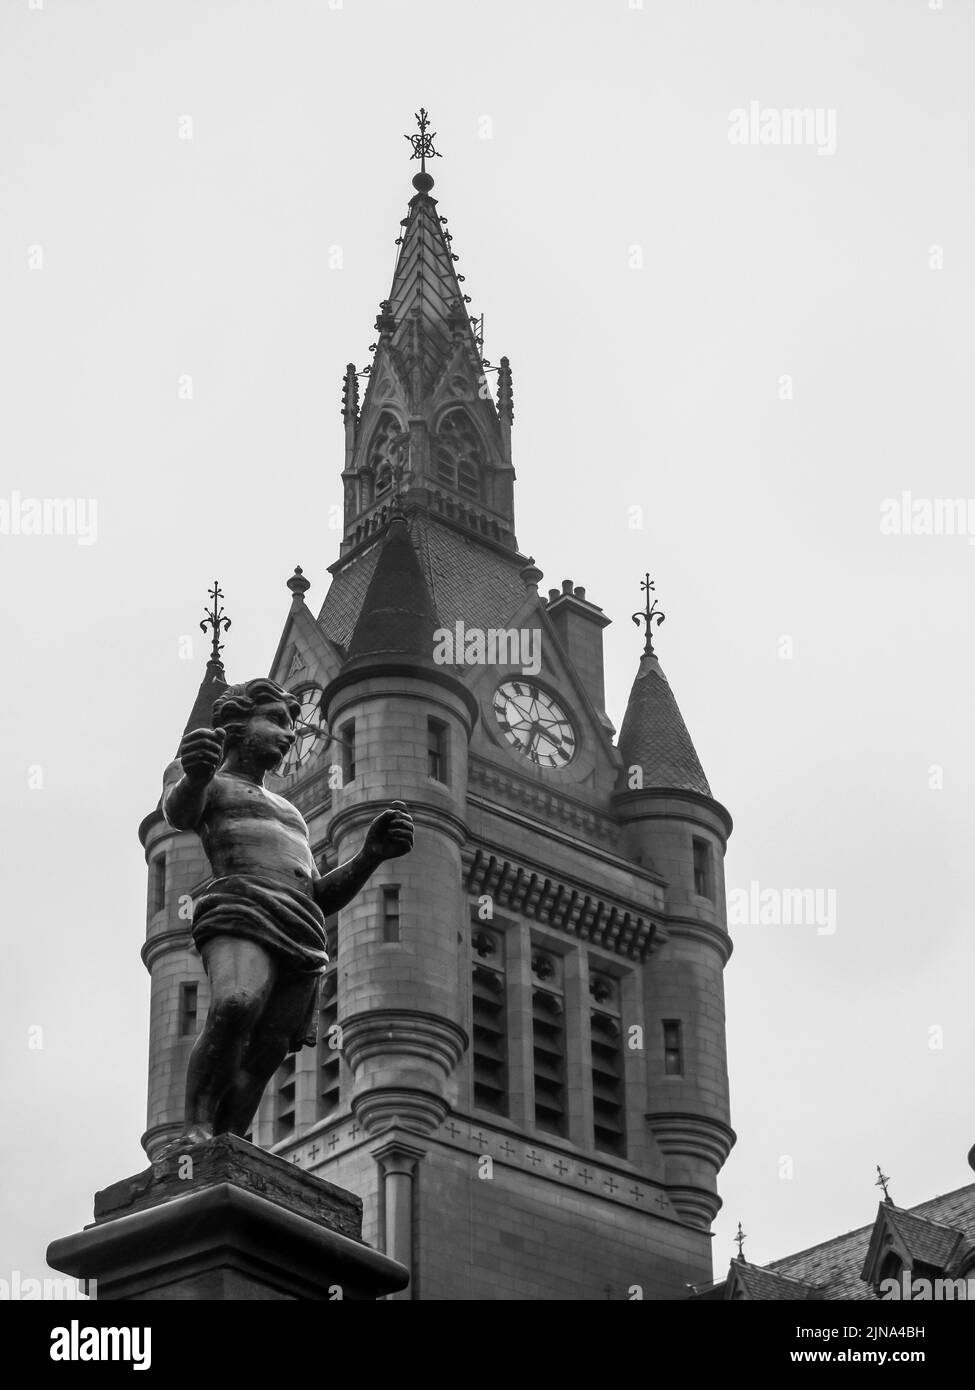 Black and white view of the Tolbooth in Aberdeen, Scotland, with the lead figurine of a boy called the Mannie in the foreground Stock Photo